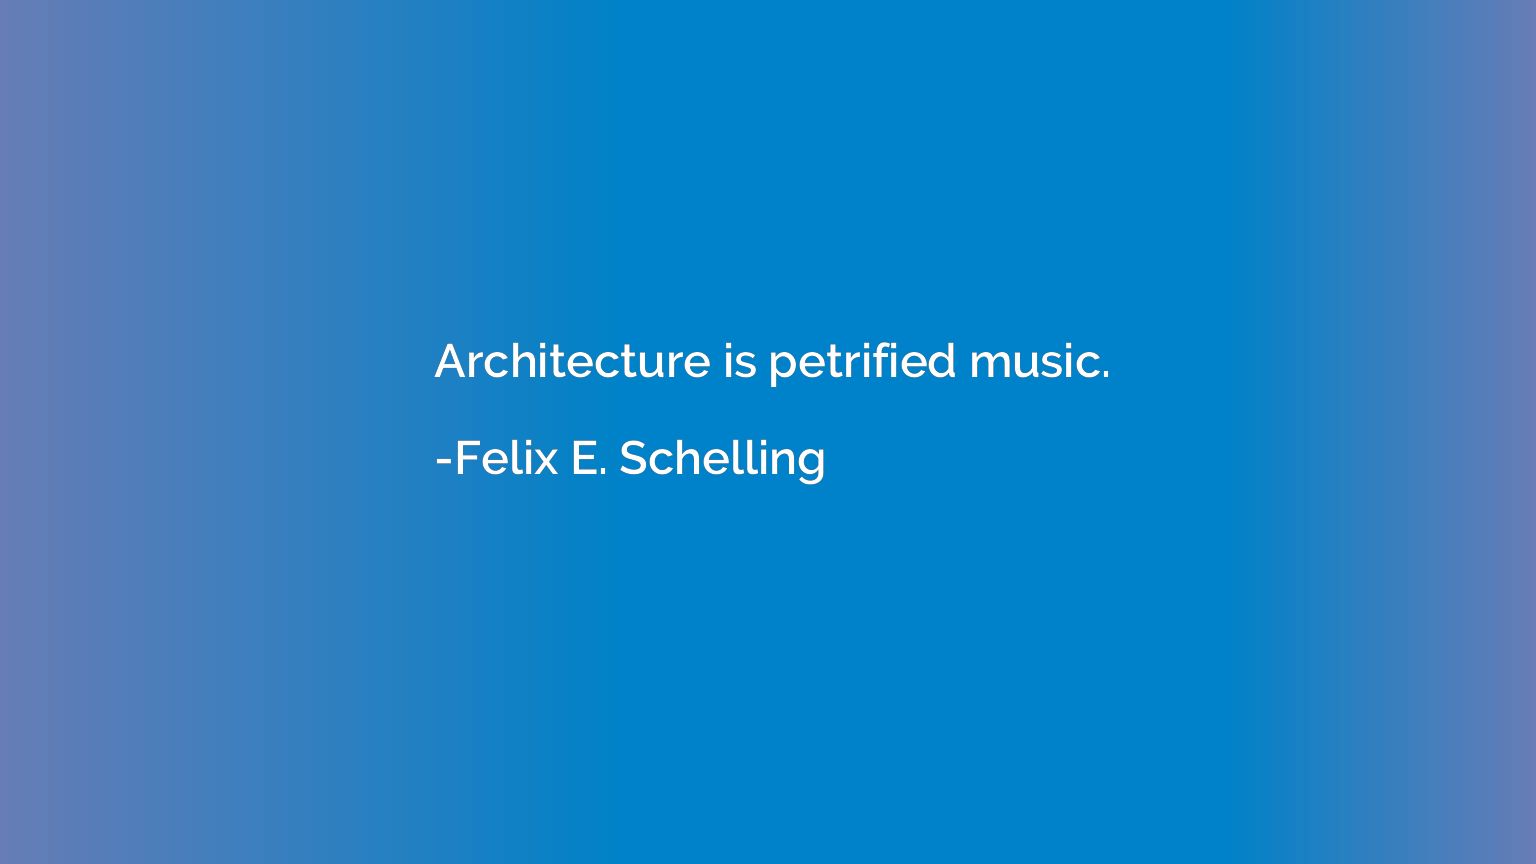 Architecture is petrified music.